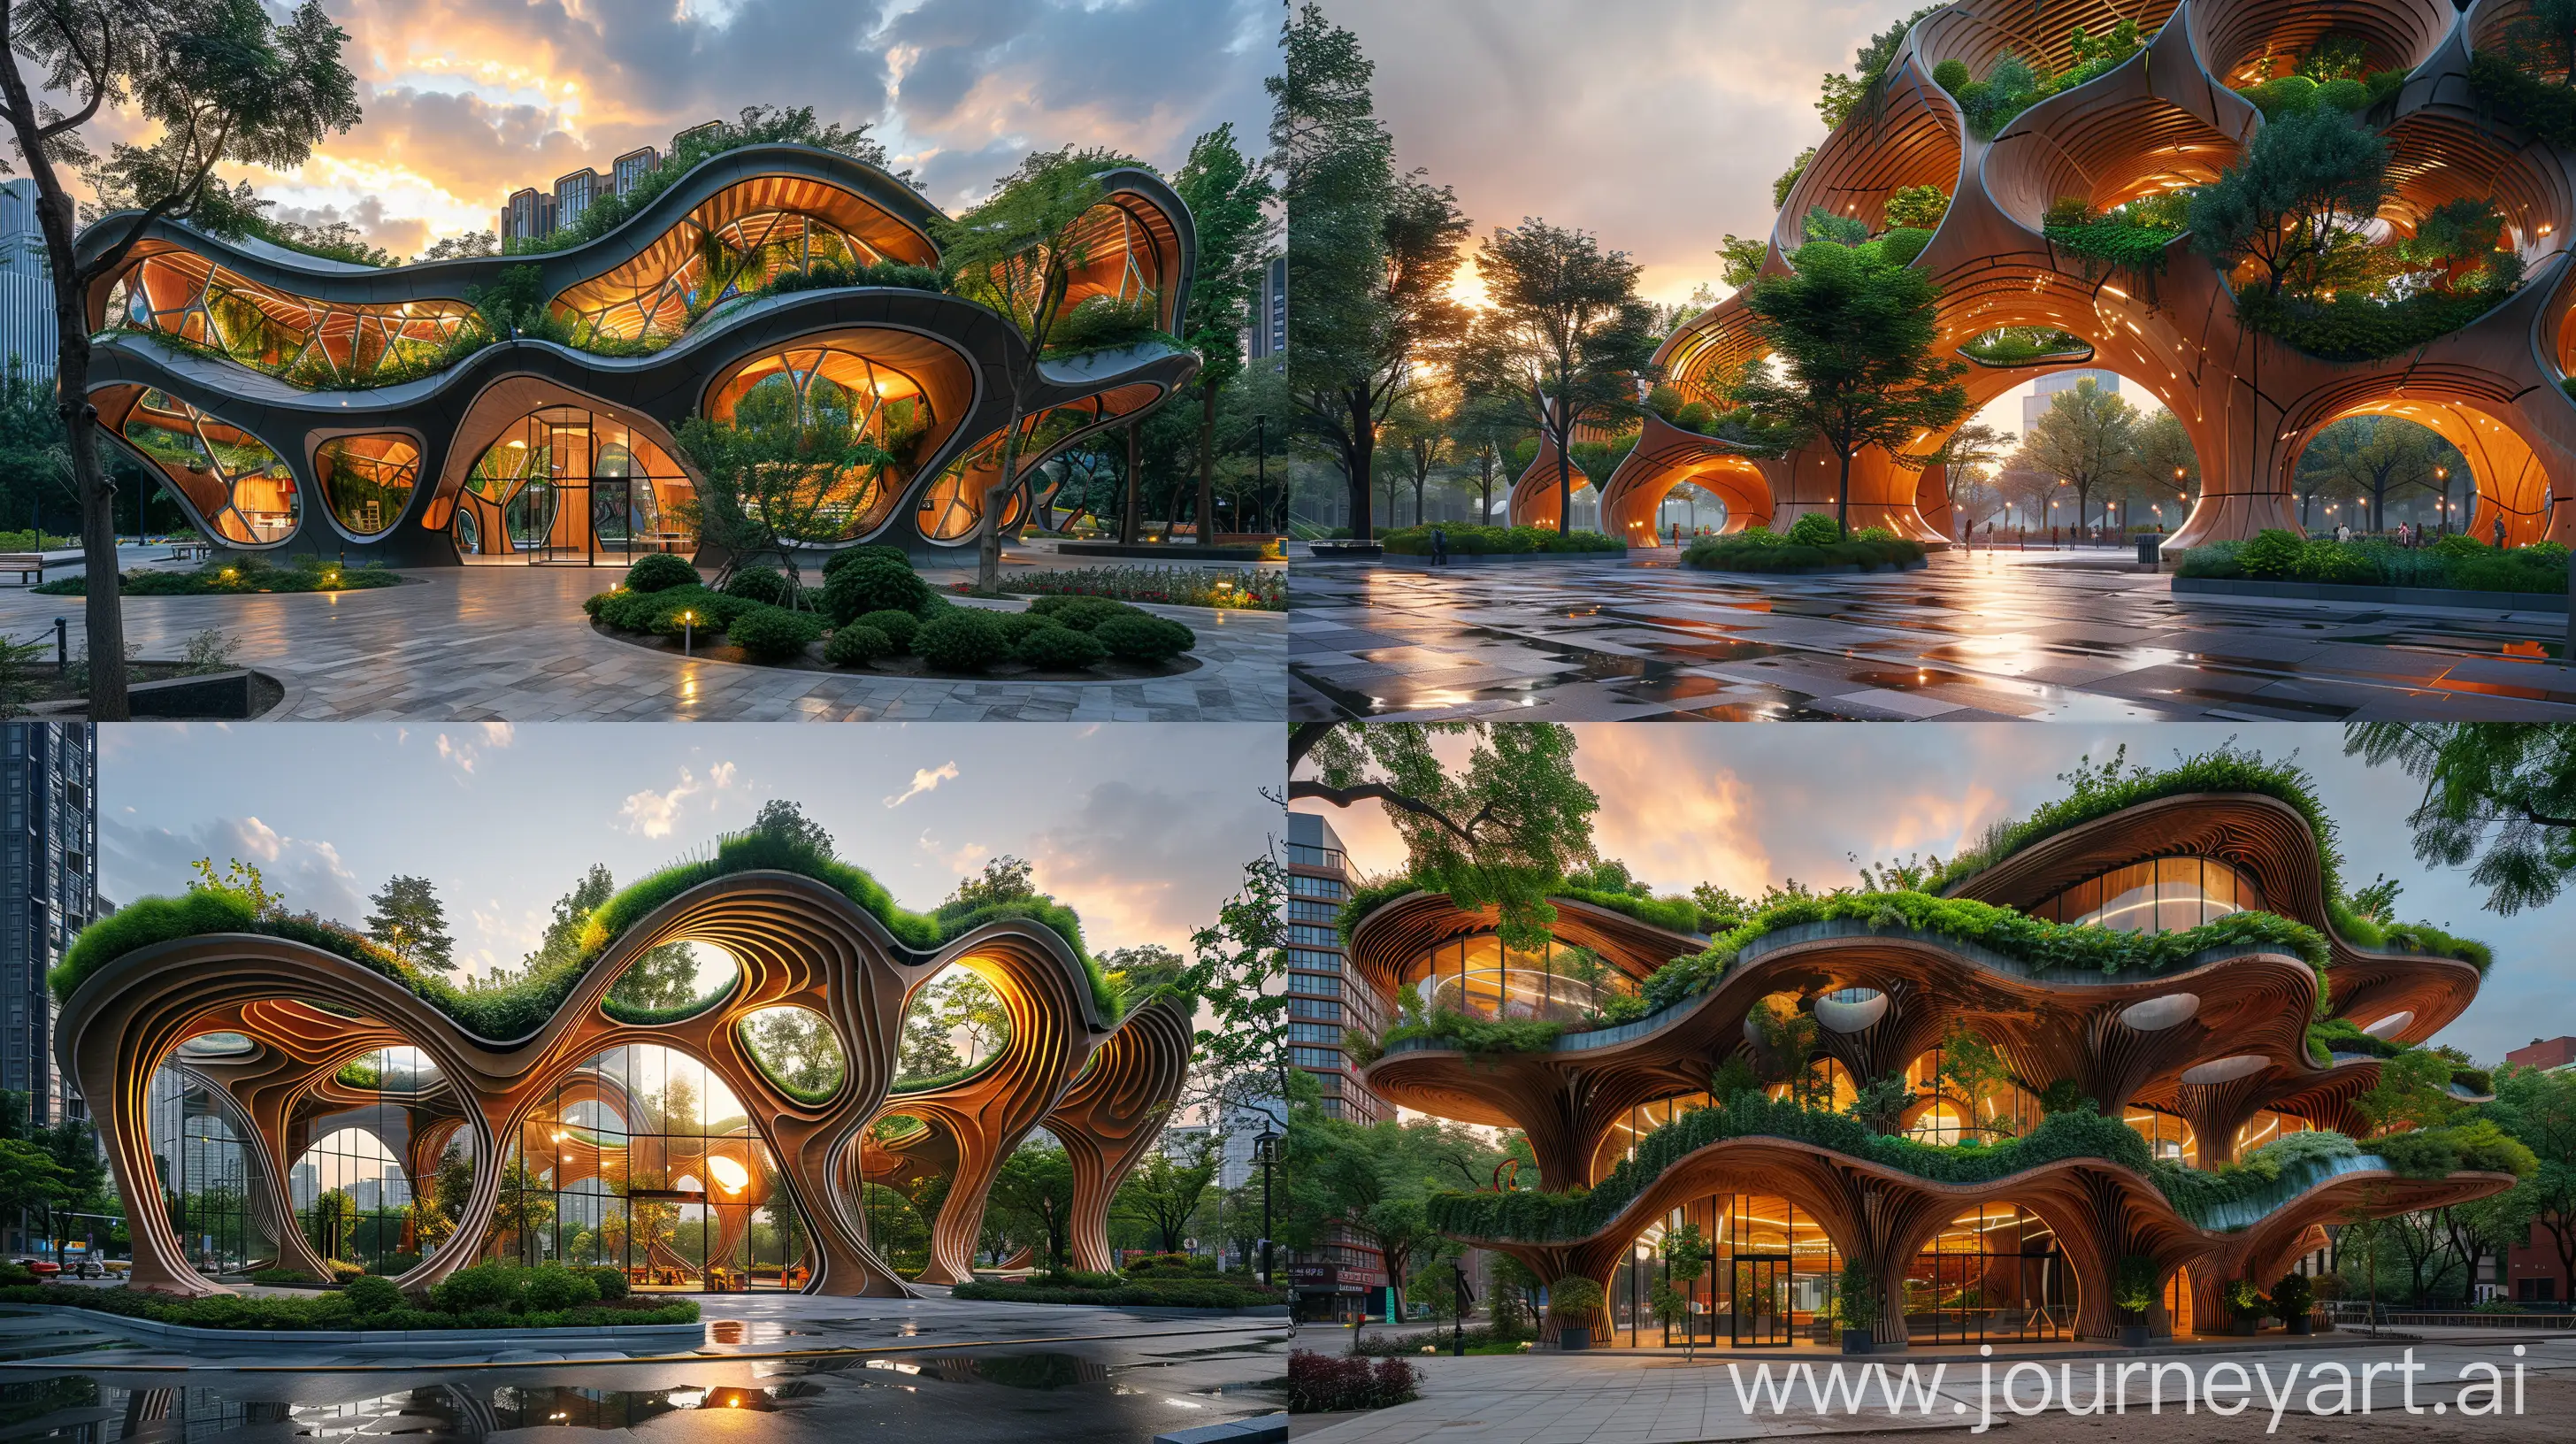 Bioinspired-Student-Pavilion-Contemporary-Coworking-Space-in-Urban-Landscape-at-Sunset